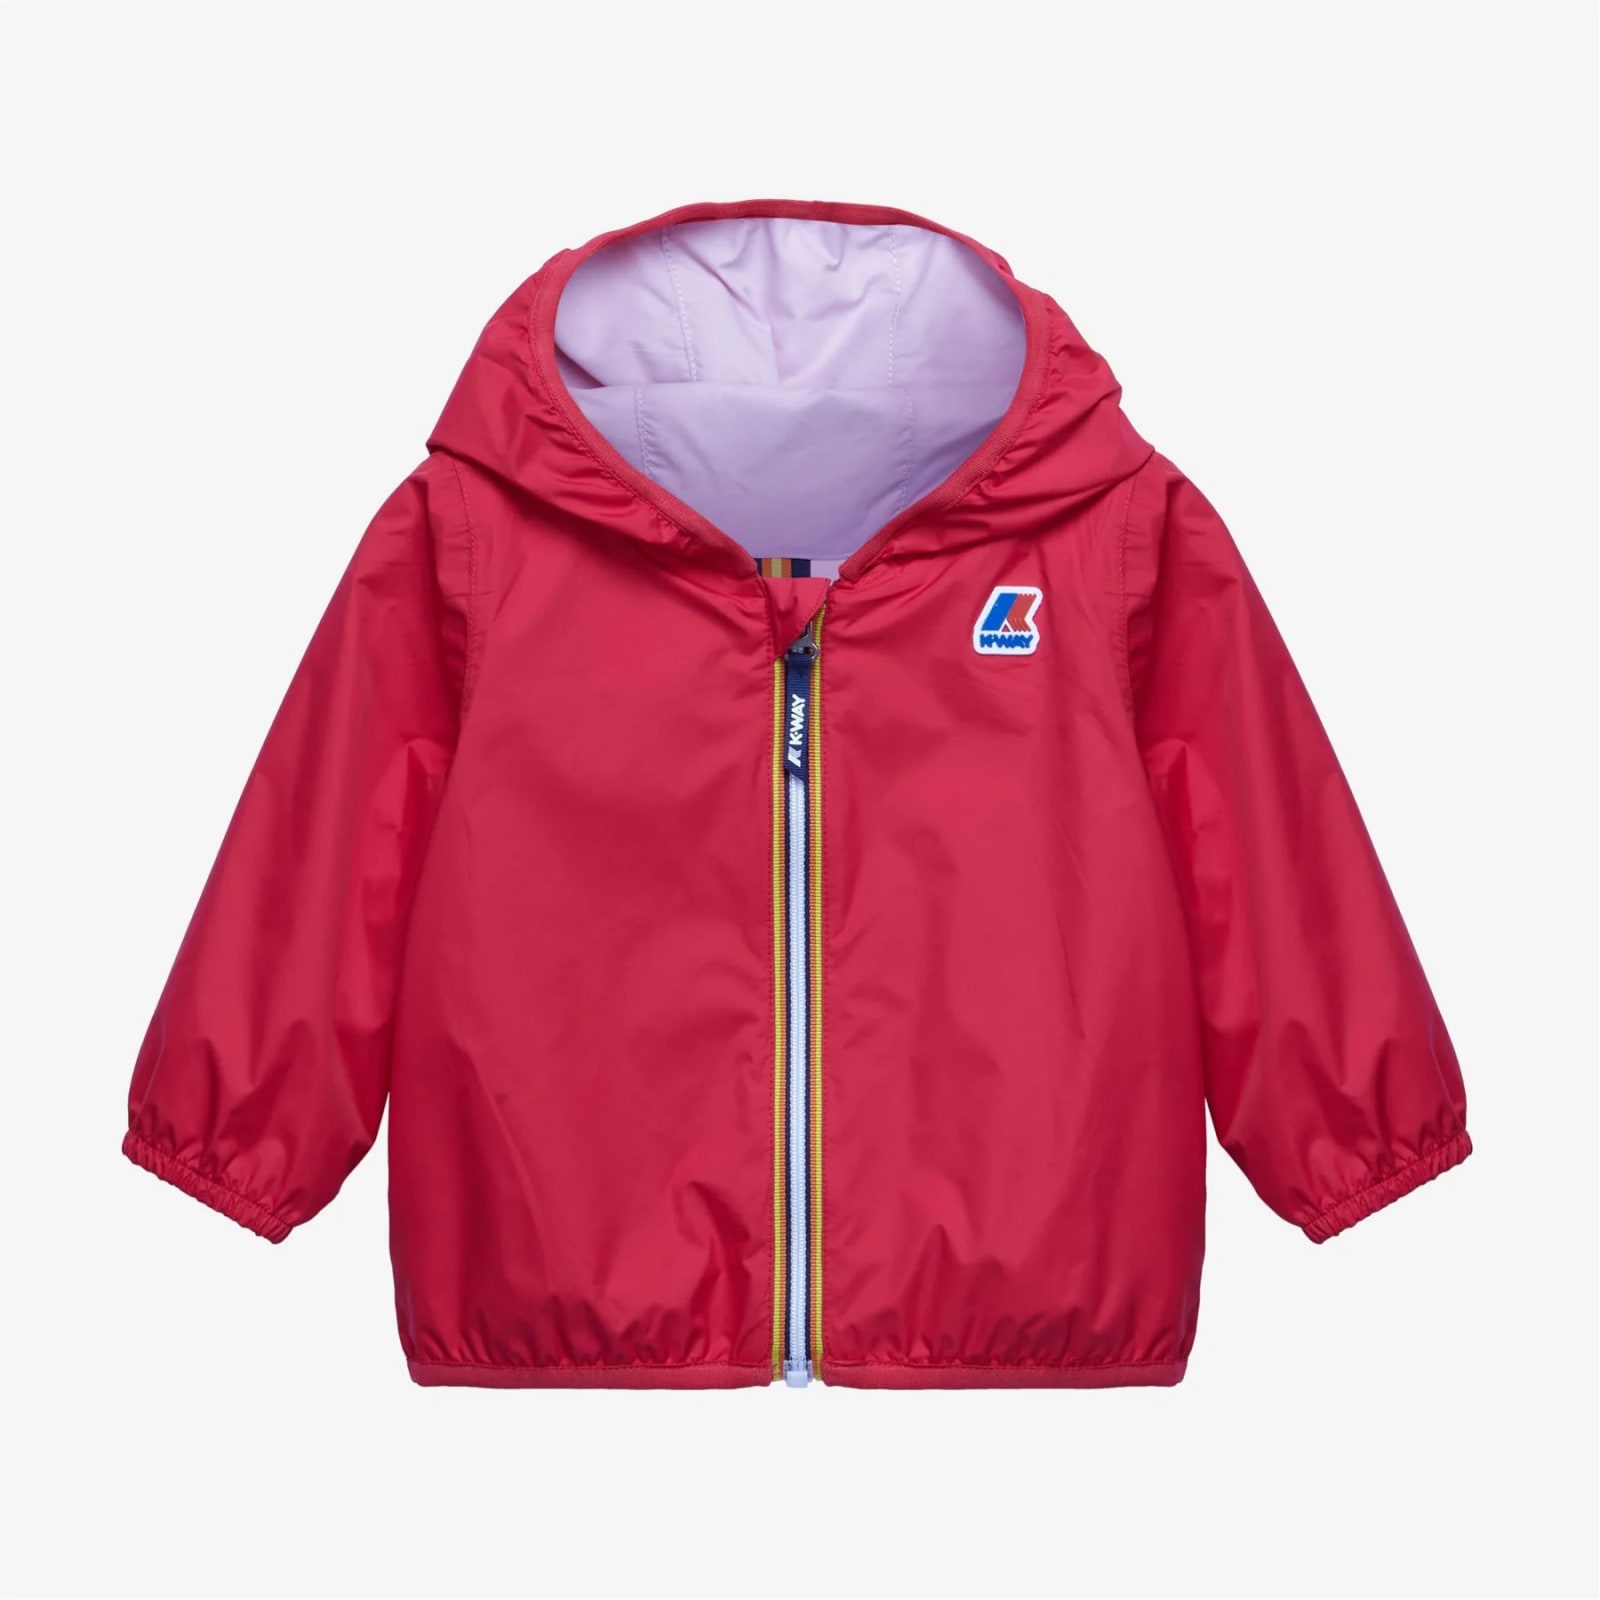 K-way Babies' Jacket With Hood In Red